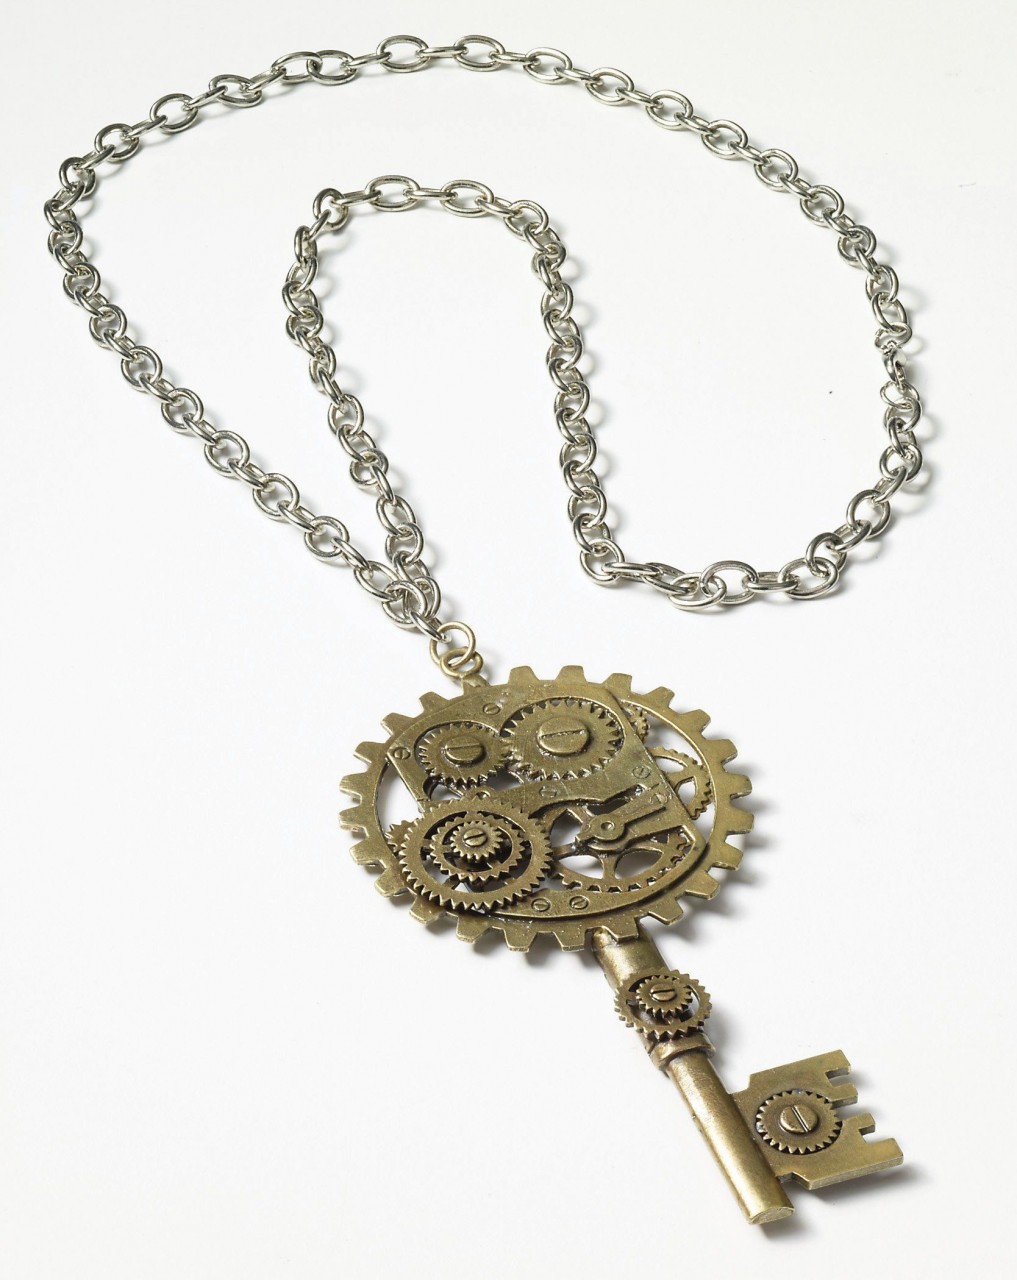 Handmade Unique Key Necklace from vintage USSR watch movement, Steampunk  Key, Gothic Key, Vintage Necklace